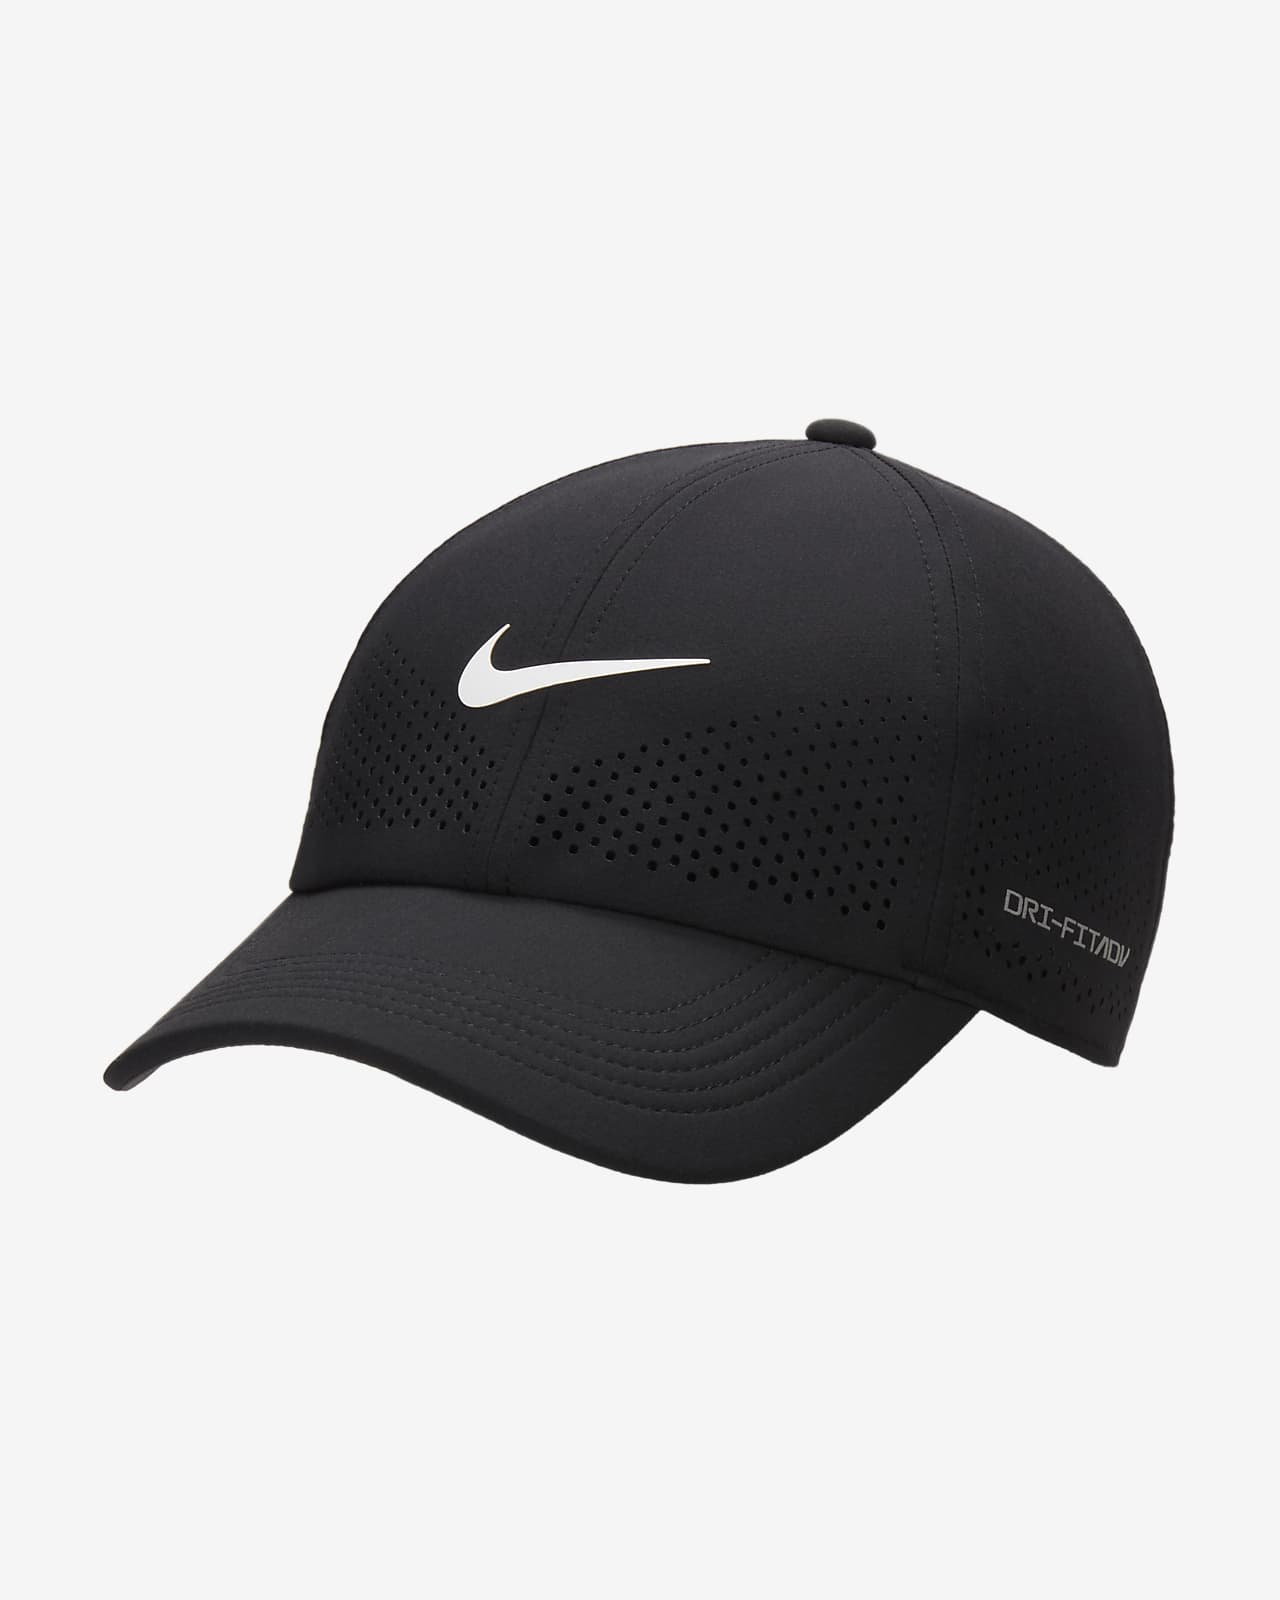 https://static.nike.com/a/images/t_PDP_1280_v1/f_auto,q_auto:eco/d922a17a-0f0a-4d97-90e5-1c5c6ebfaa39/dri-fit-adv-club-unstructured-swoosh-cap-gtlmqK.png